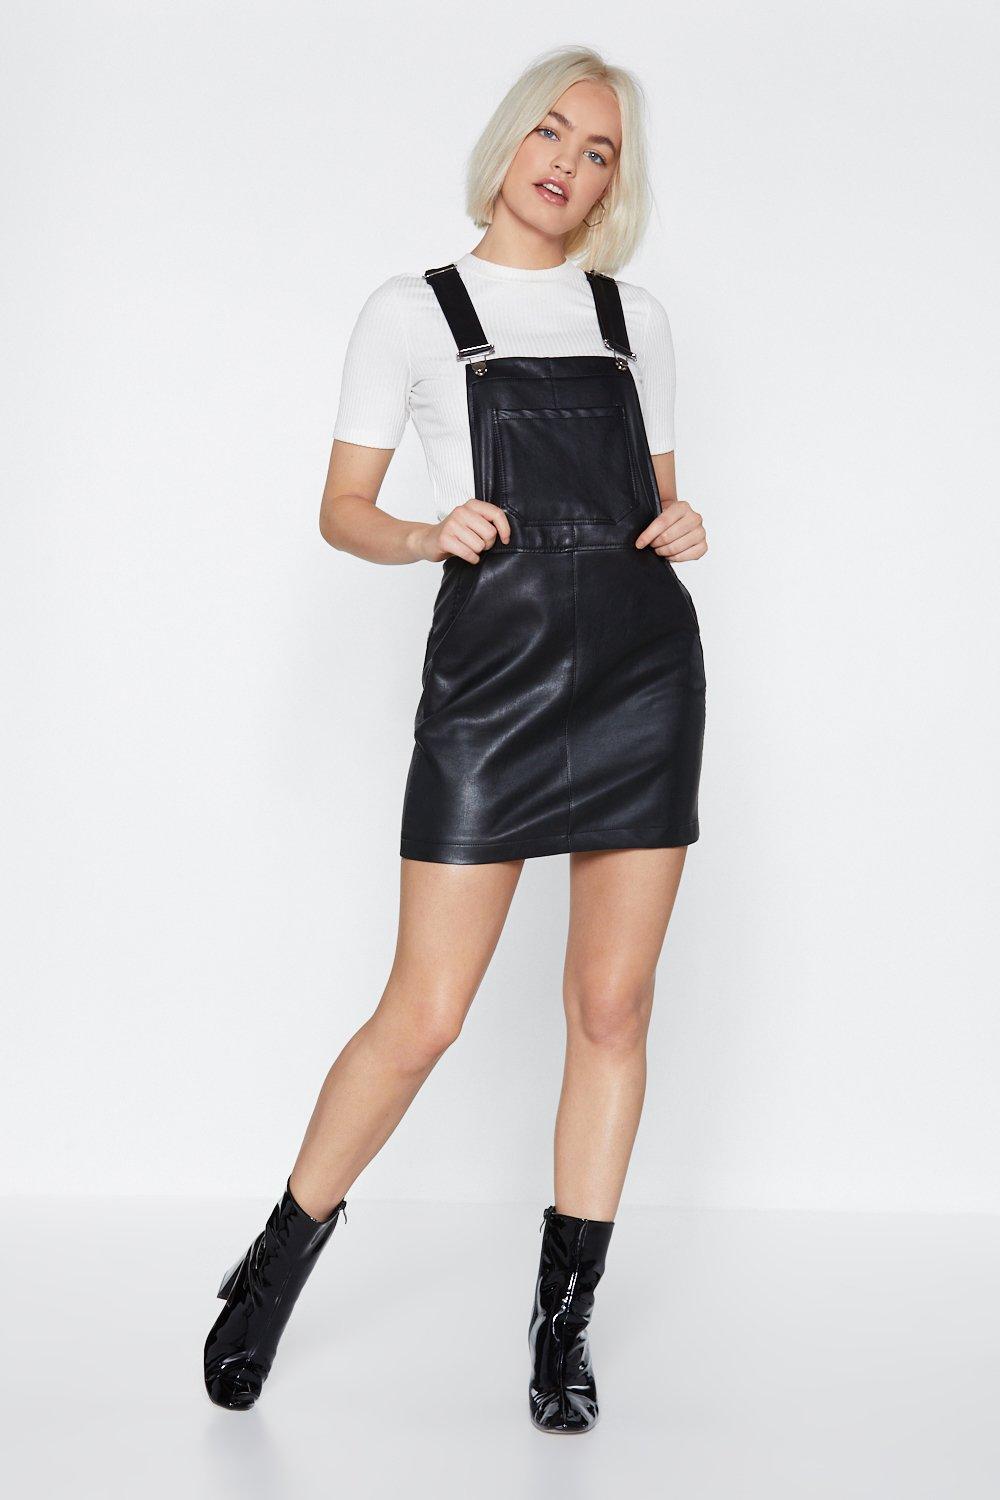 black leather pinafore